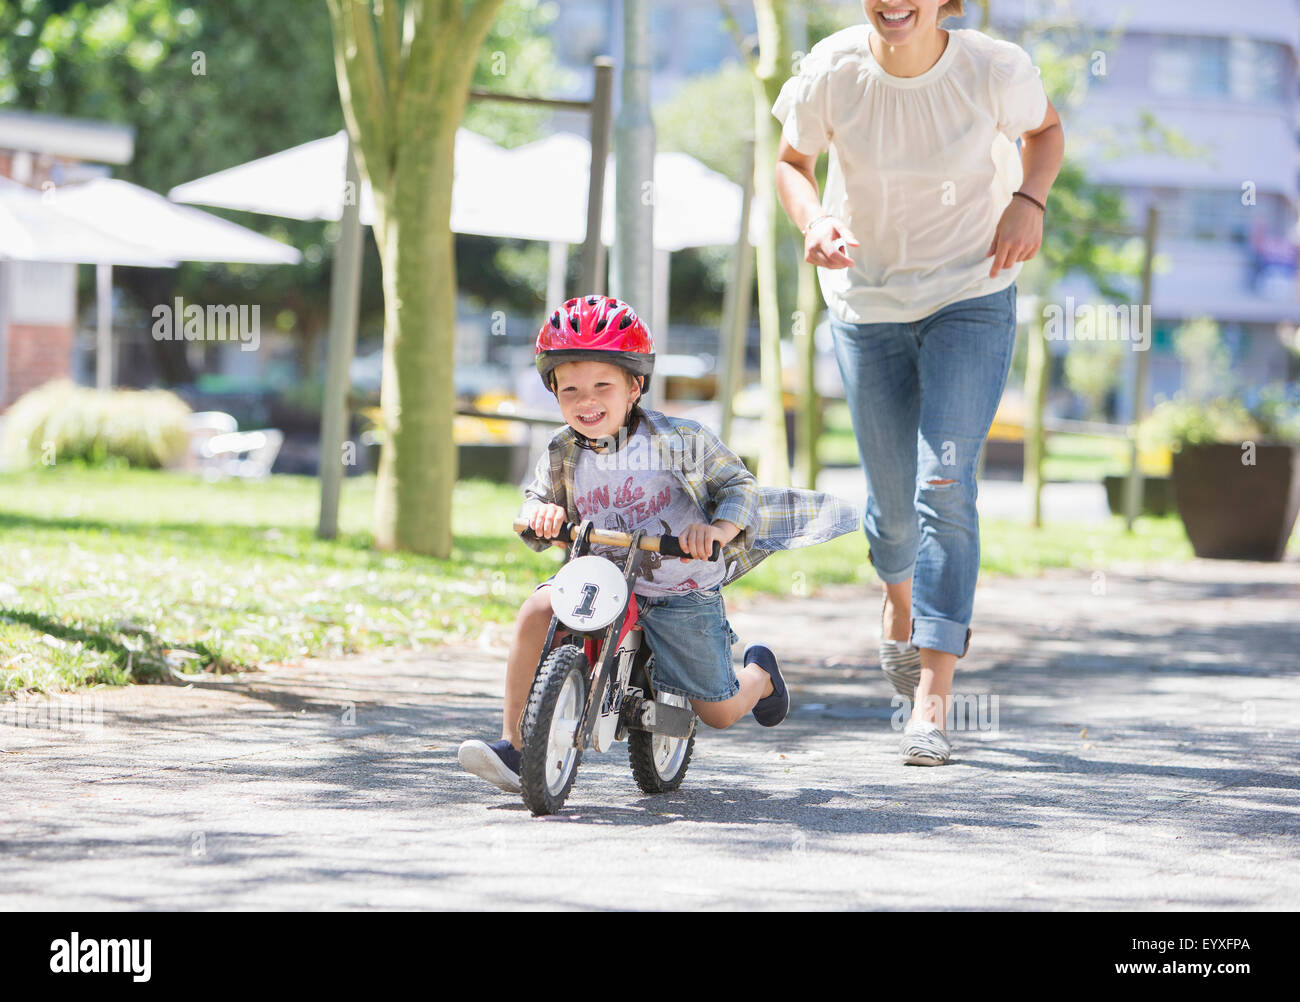 Mother chasing son riding bicycle with helmet in sunny park Stock Photo